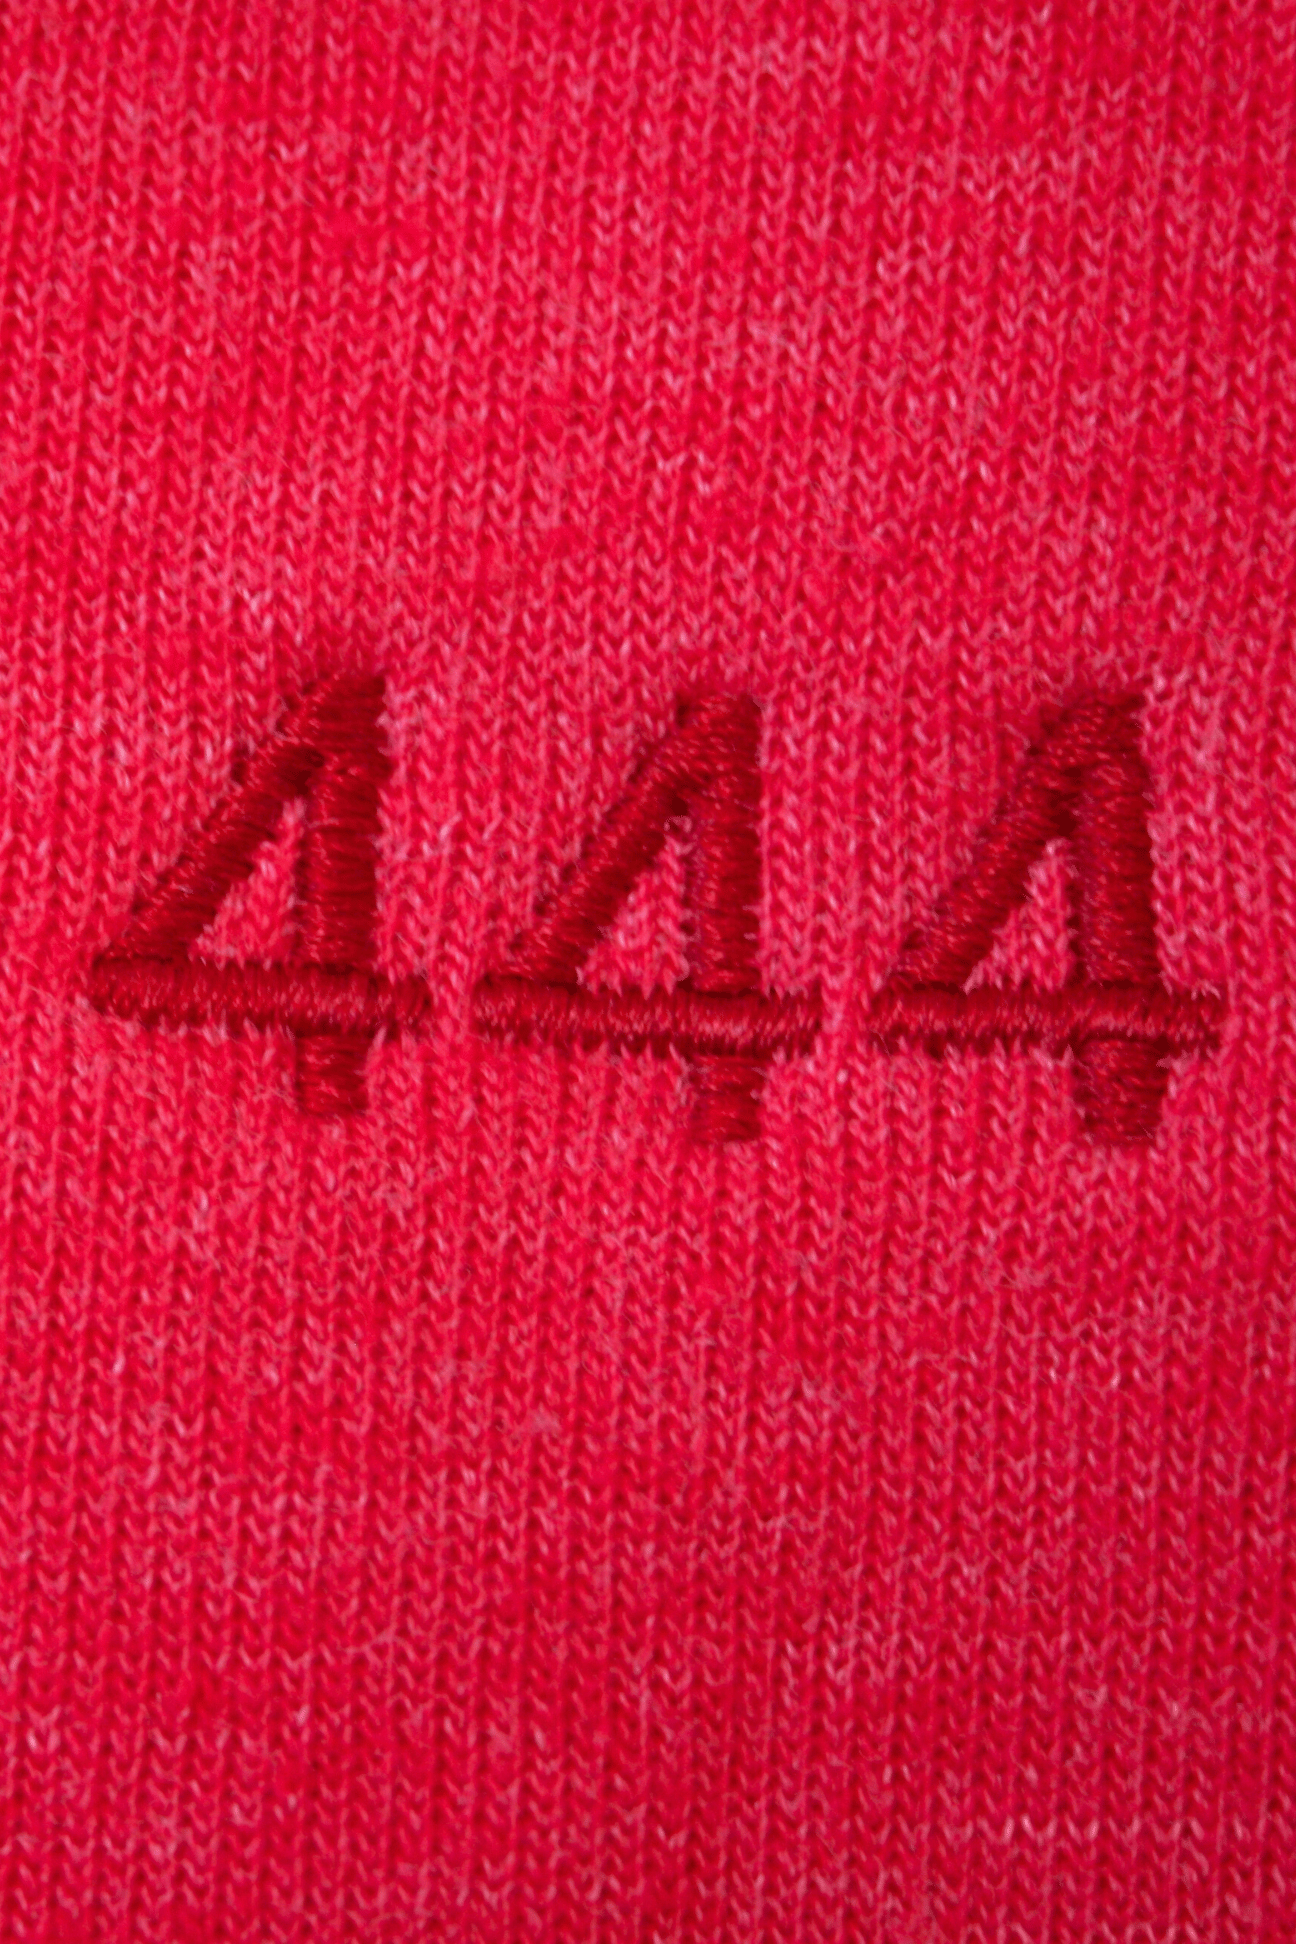 Close-up of red fabric with triple 'a' embroidery in matching thread, symbolizing Angel Number 444 Women's Pants by GFLApparel and divine intention.